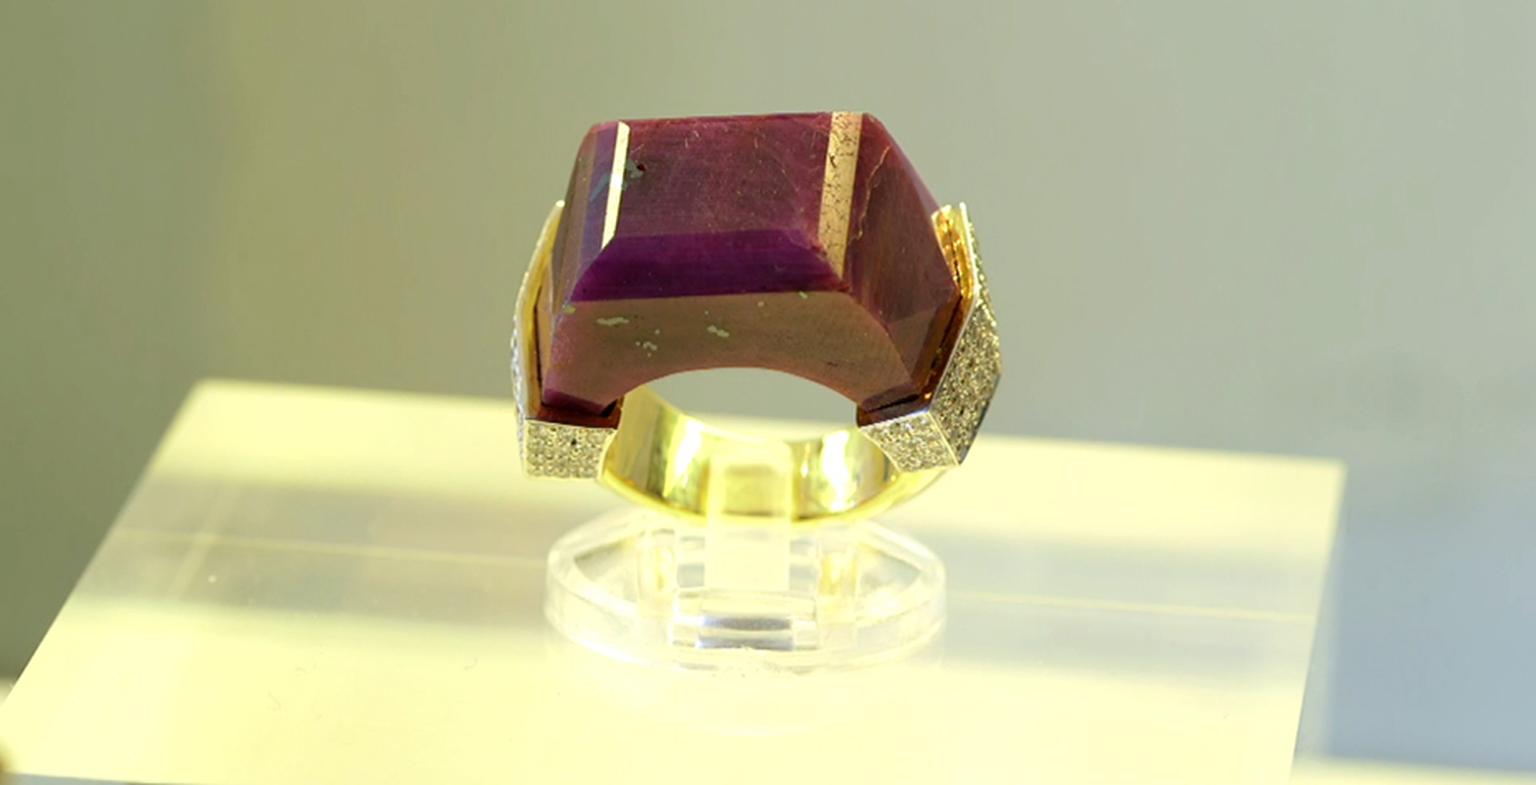 Jade Jagger Never Ending jewellery collection ruby ring. Available at 1stdibs.com.